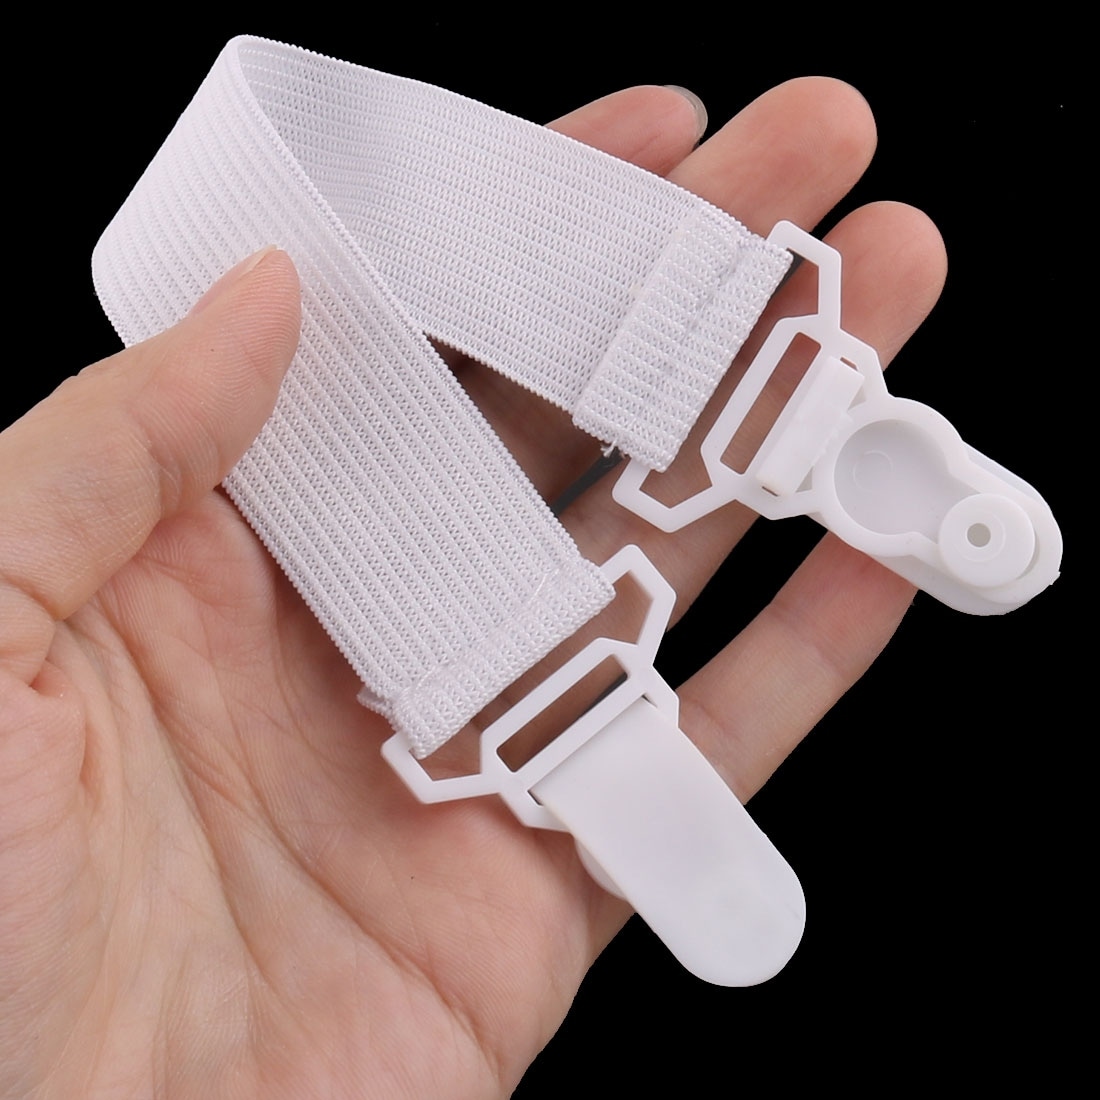 Sheet Grippers - Elastic Bed Sheet Suspender Clips - Fits Any Size Mattress  - 4 Pack - On Sale - Bed Bath & Beyond - 32889914